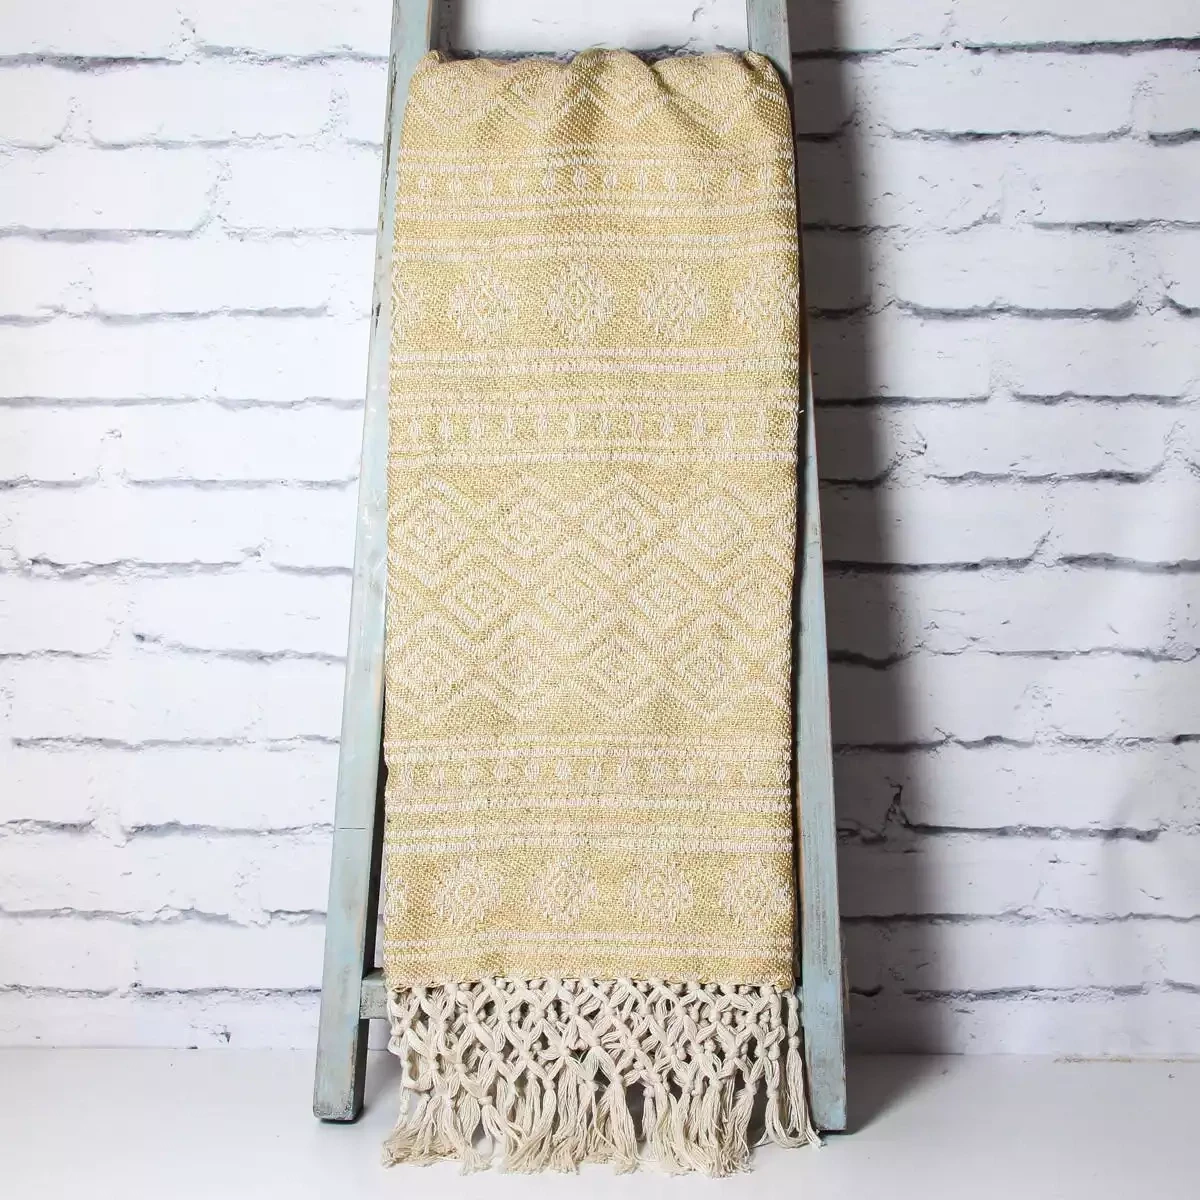 Zahira Handloom Recycled Throw with Hand Knotted Fringe - Old Gold - 125x150cm by Namaste